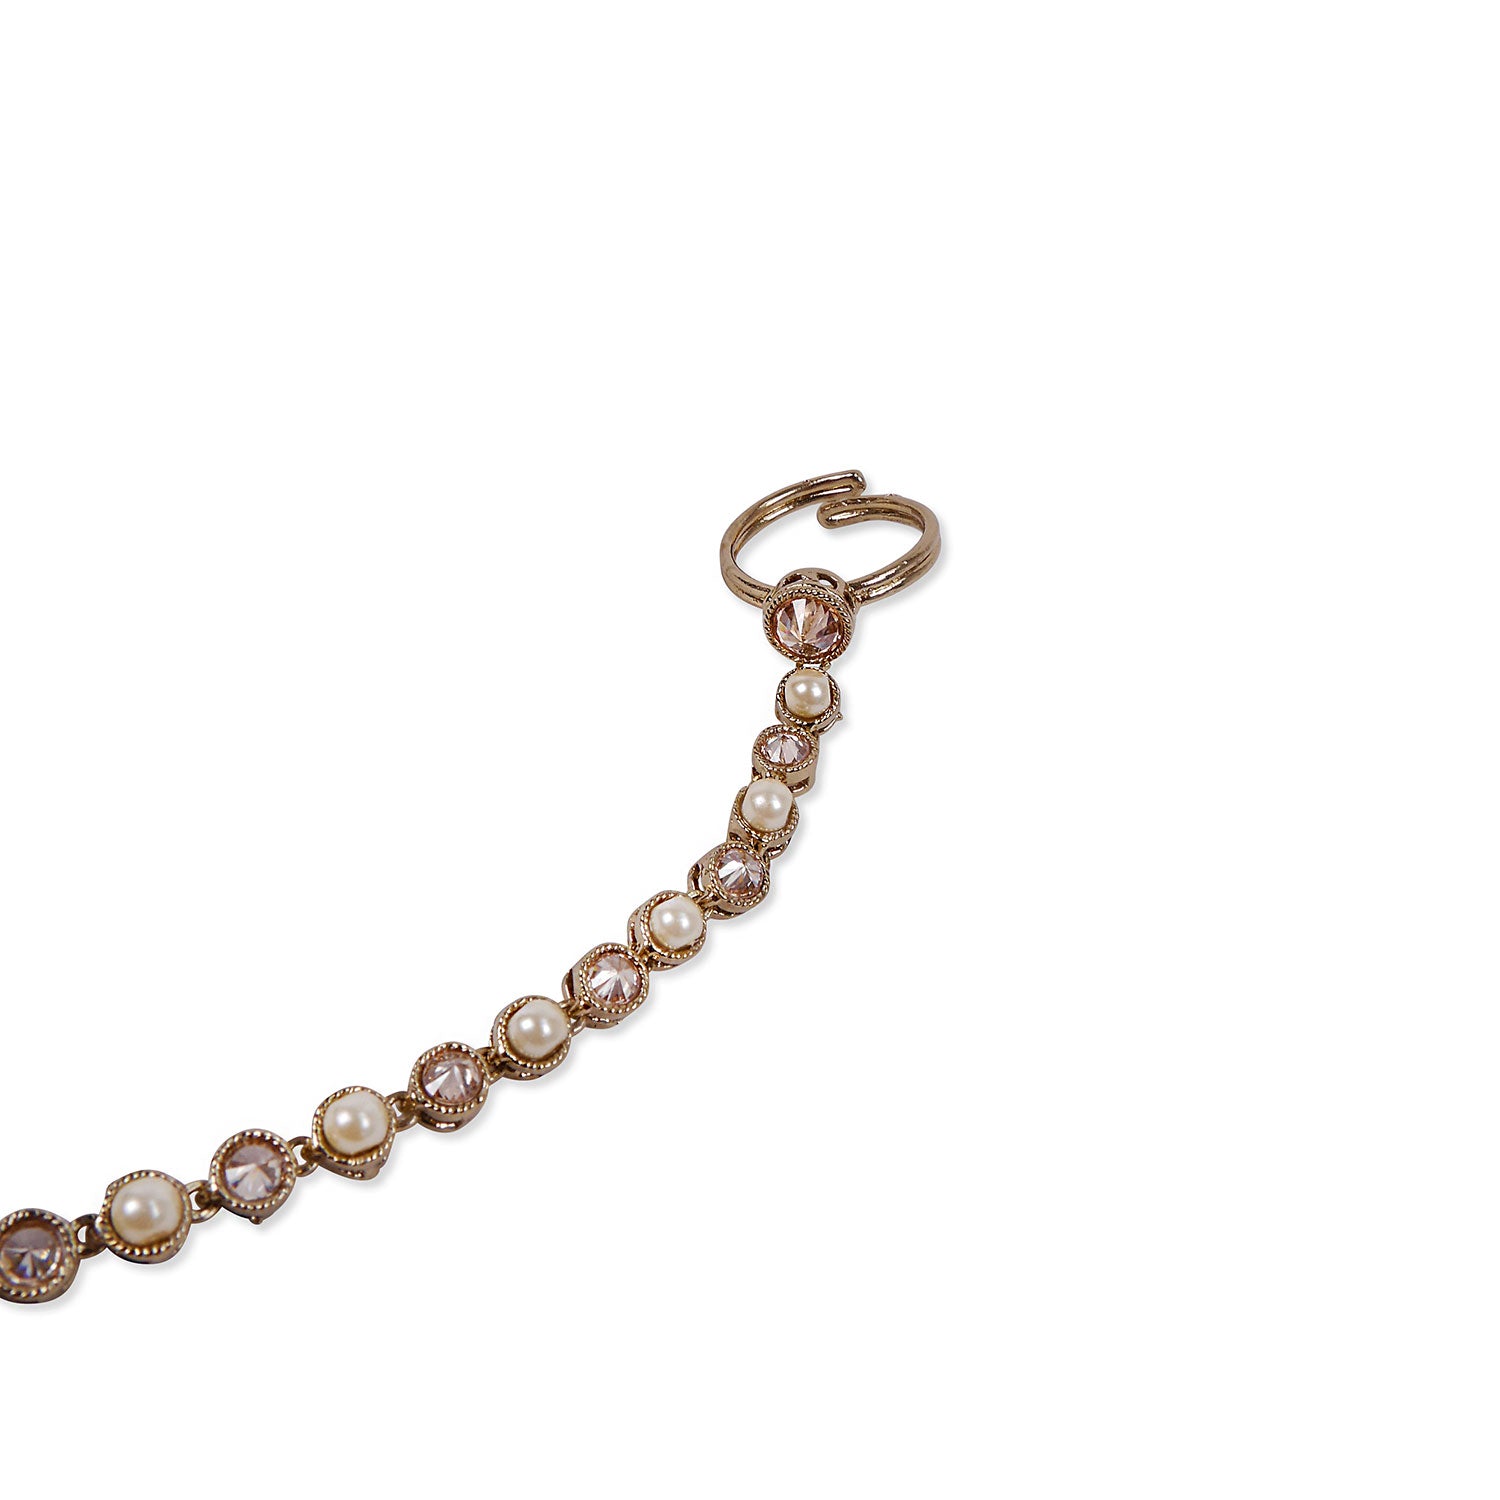 Grace Handpiece in Pearl and Antique Gold